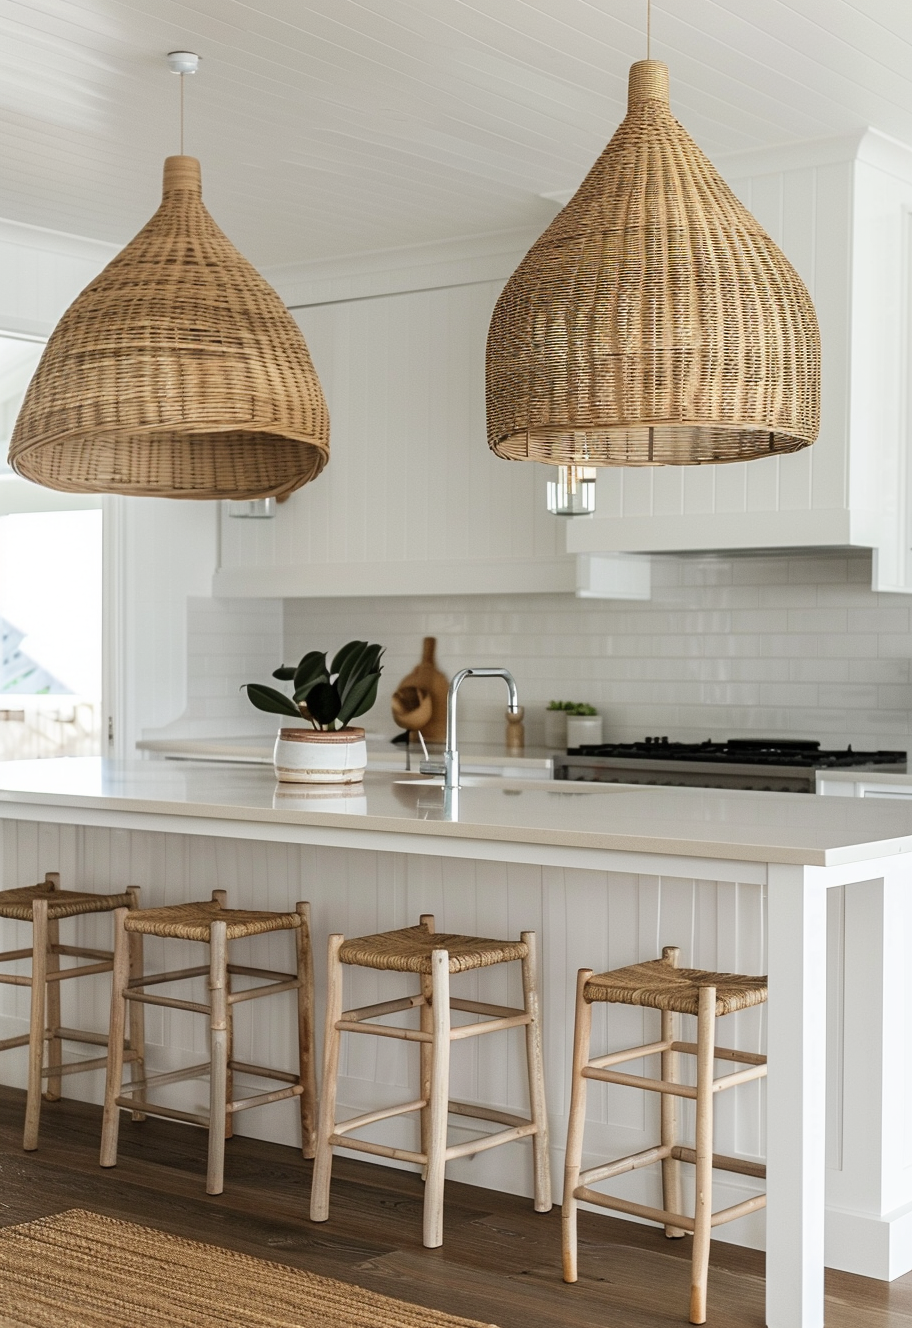 Eclectic seating options, including rattan chairs, for a modern boho kitchen ambiance